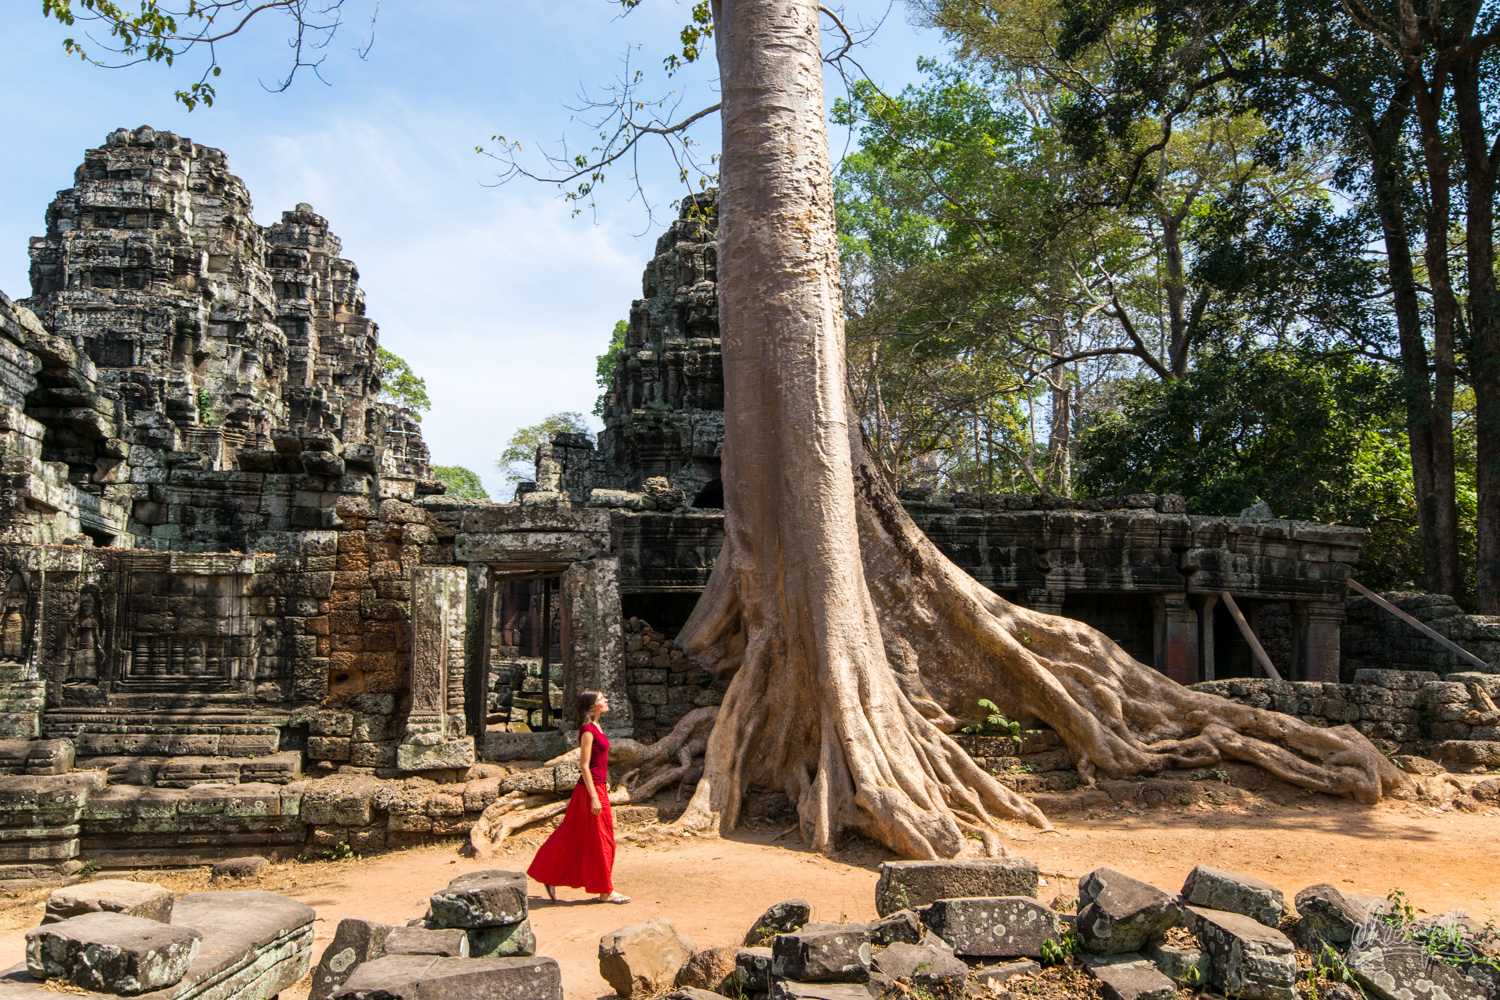 Little red riding hood in Angkor temples, here at Banteay Kdei